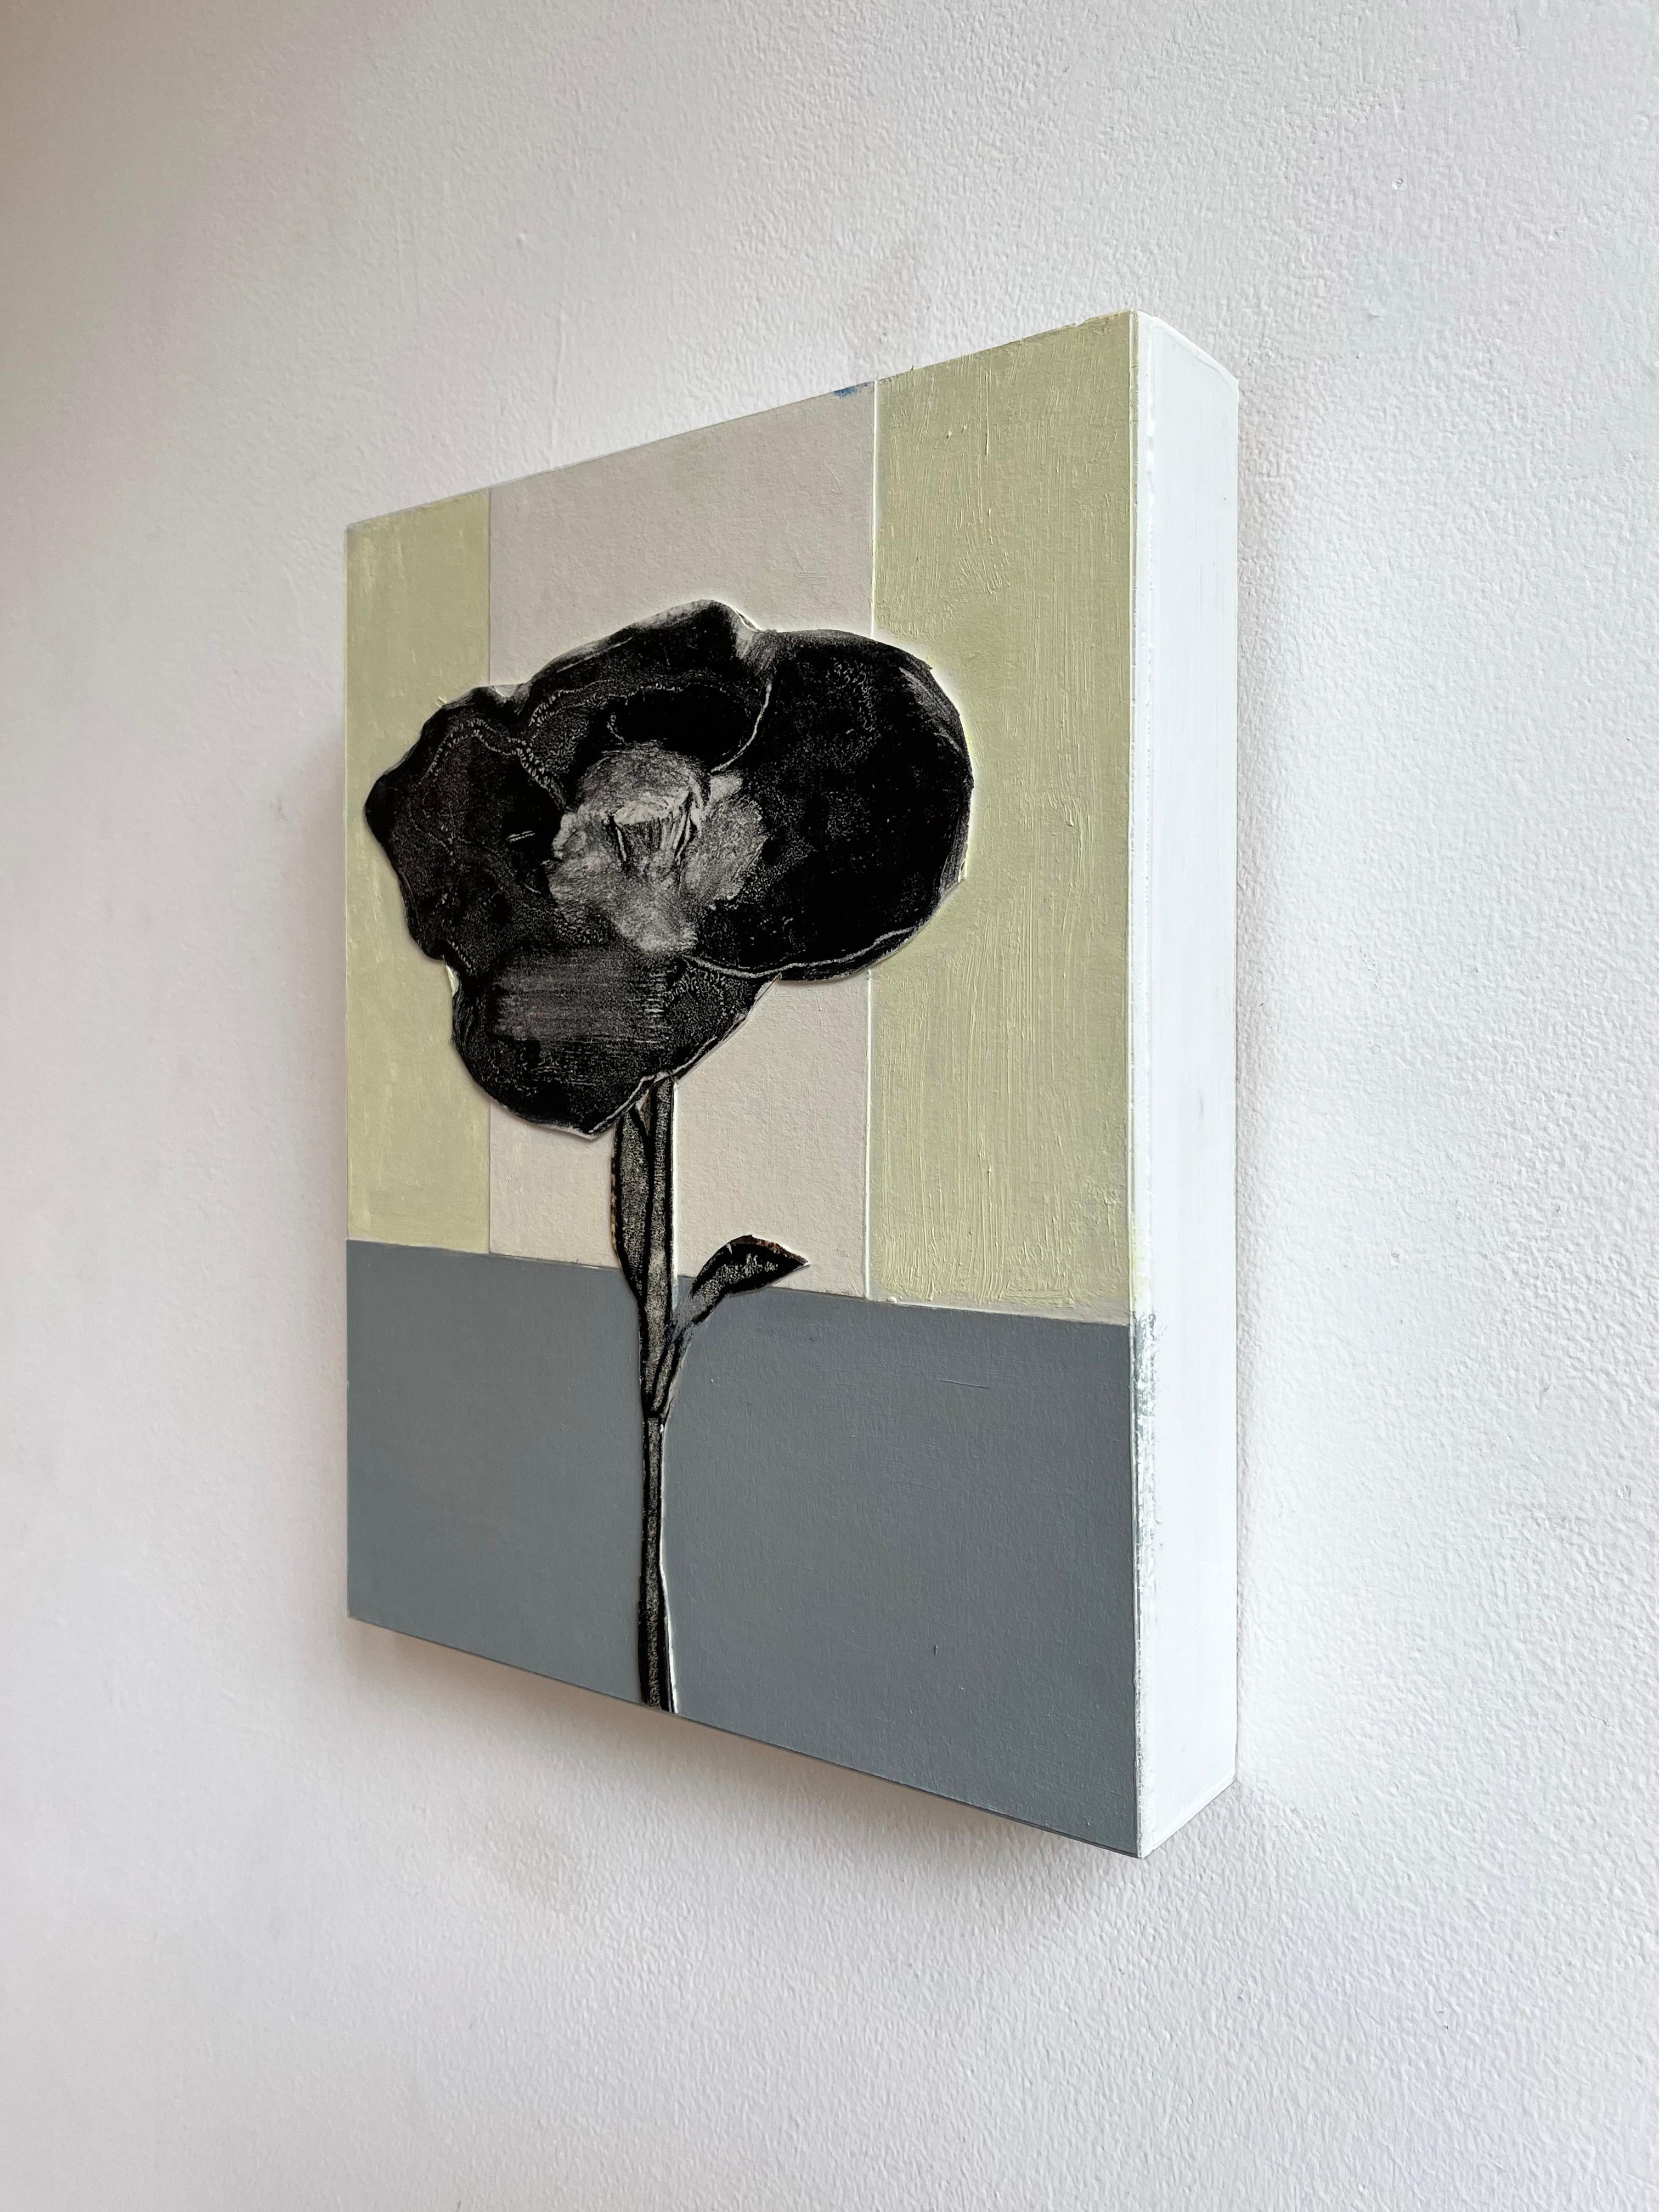 Small still-life painting on panel of a black poppy flower on a pastel yellow and slate grey background
Black Poppy, made by David Konigsberg, in 2023
monotype, oil, and collage on panel
11.5 x 9 x 2 inches 
Signed, verso
Excellent condition and